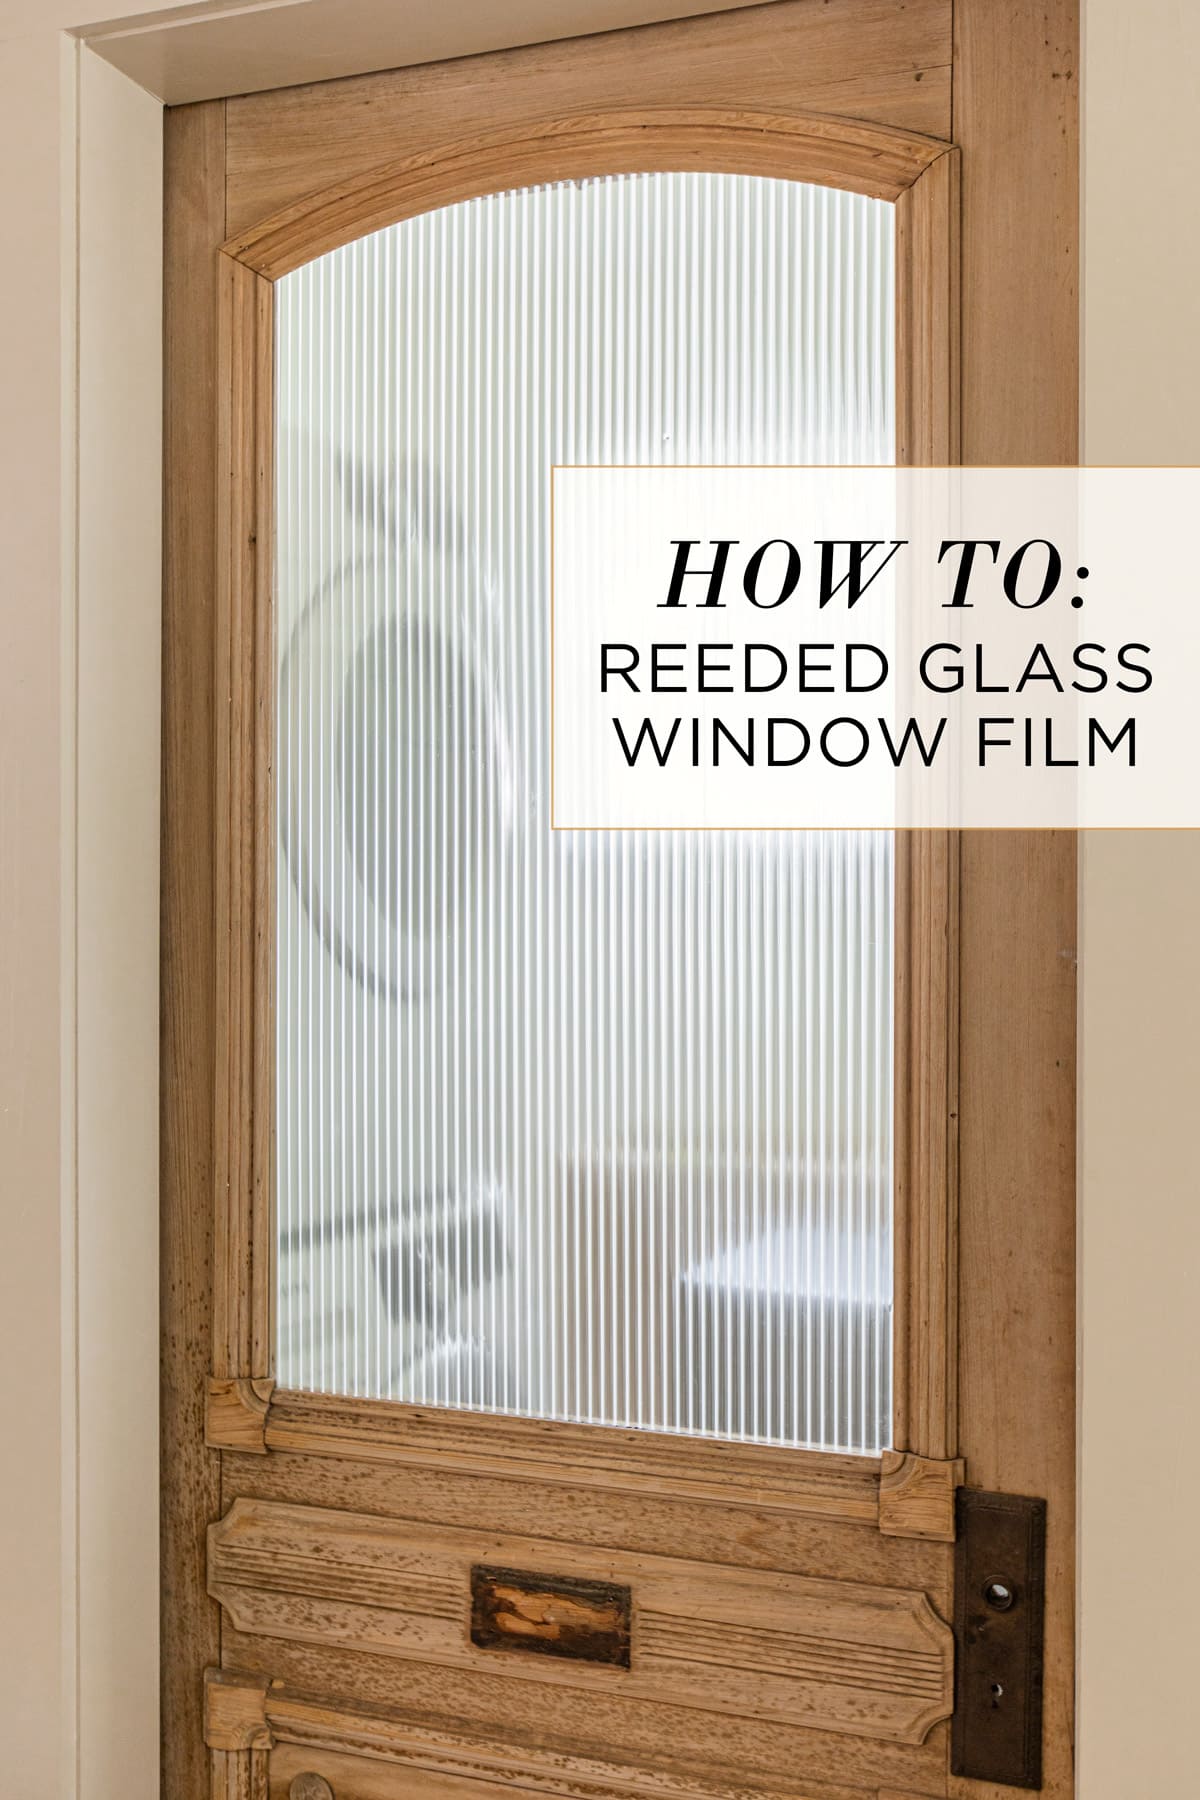 Home Renovations: Tips to Select Trendy Window Glass Design